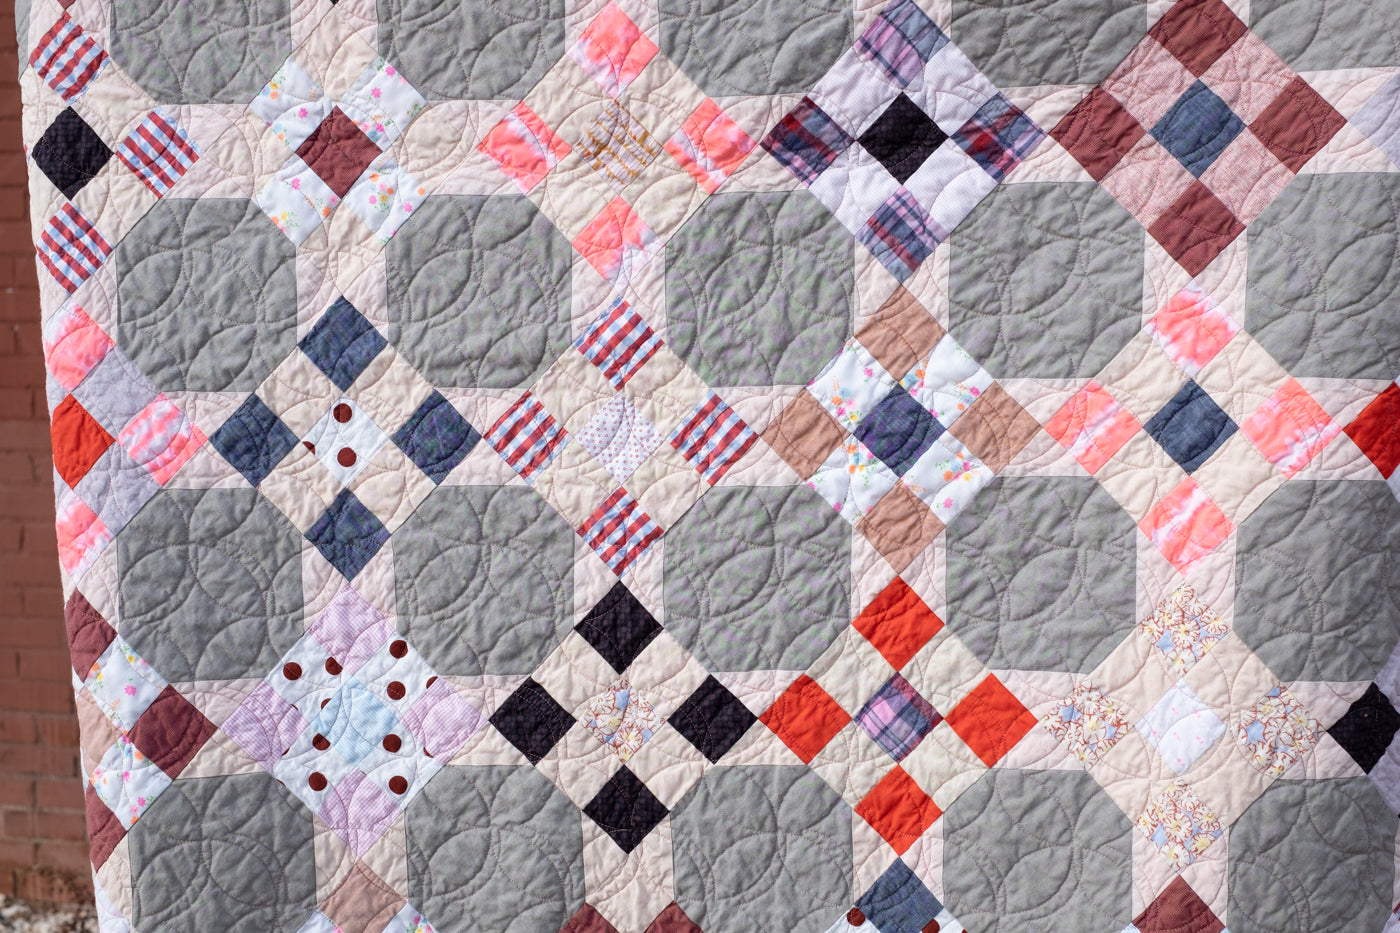 Photograph of scrap quilt up close in detail.